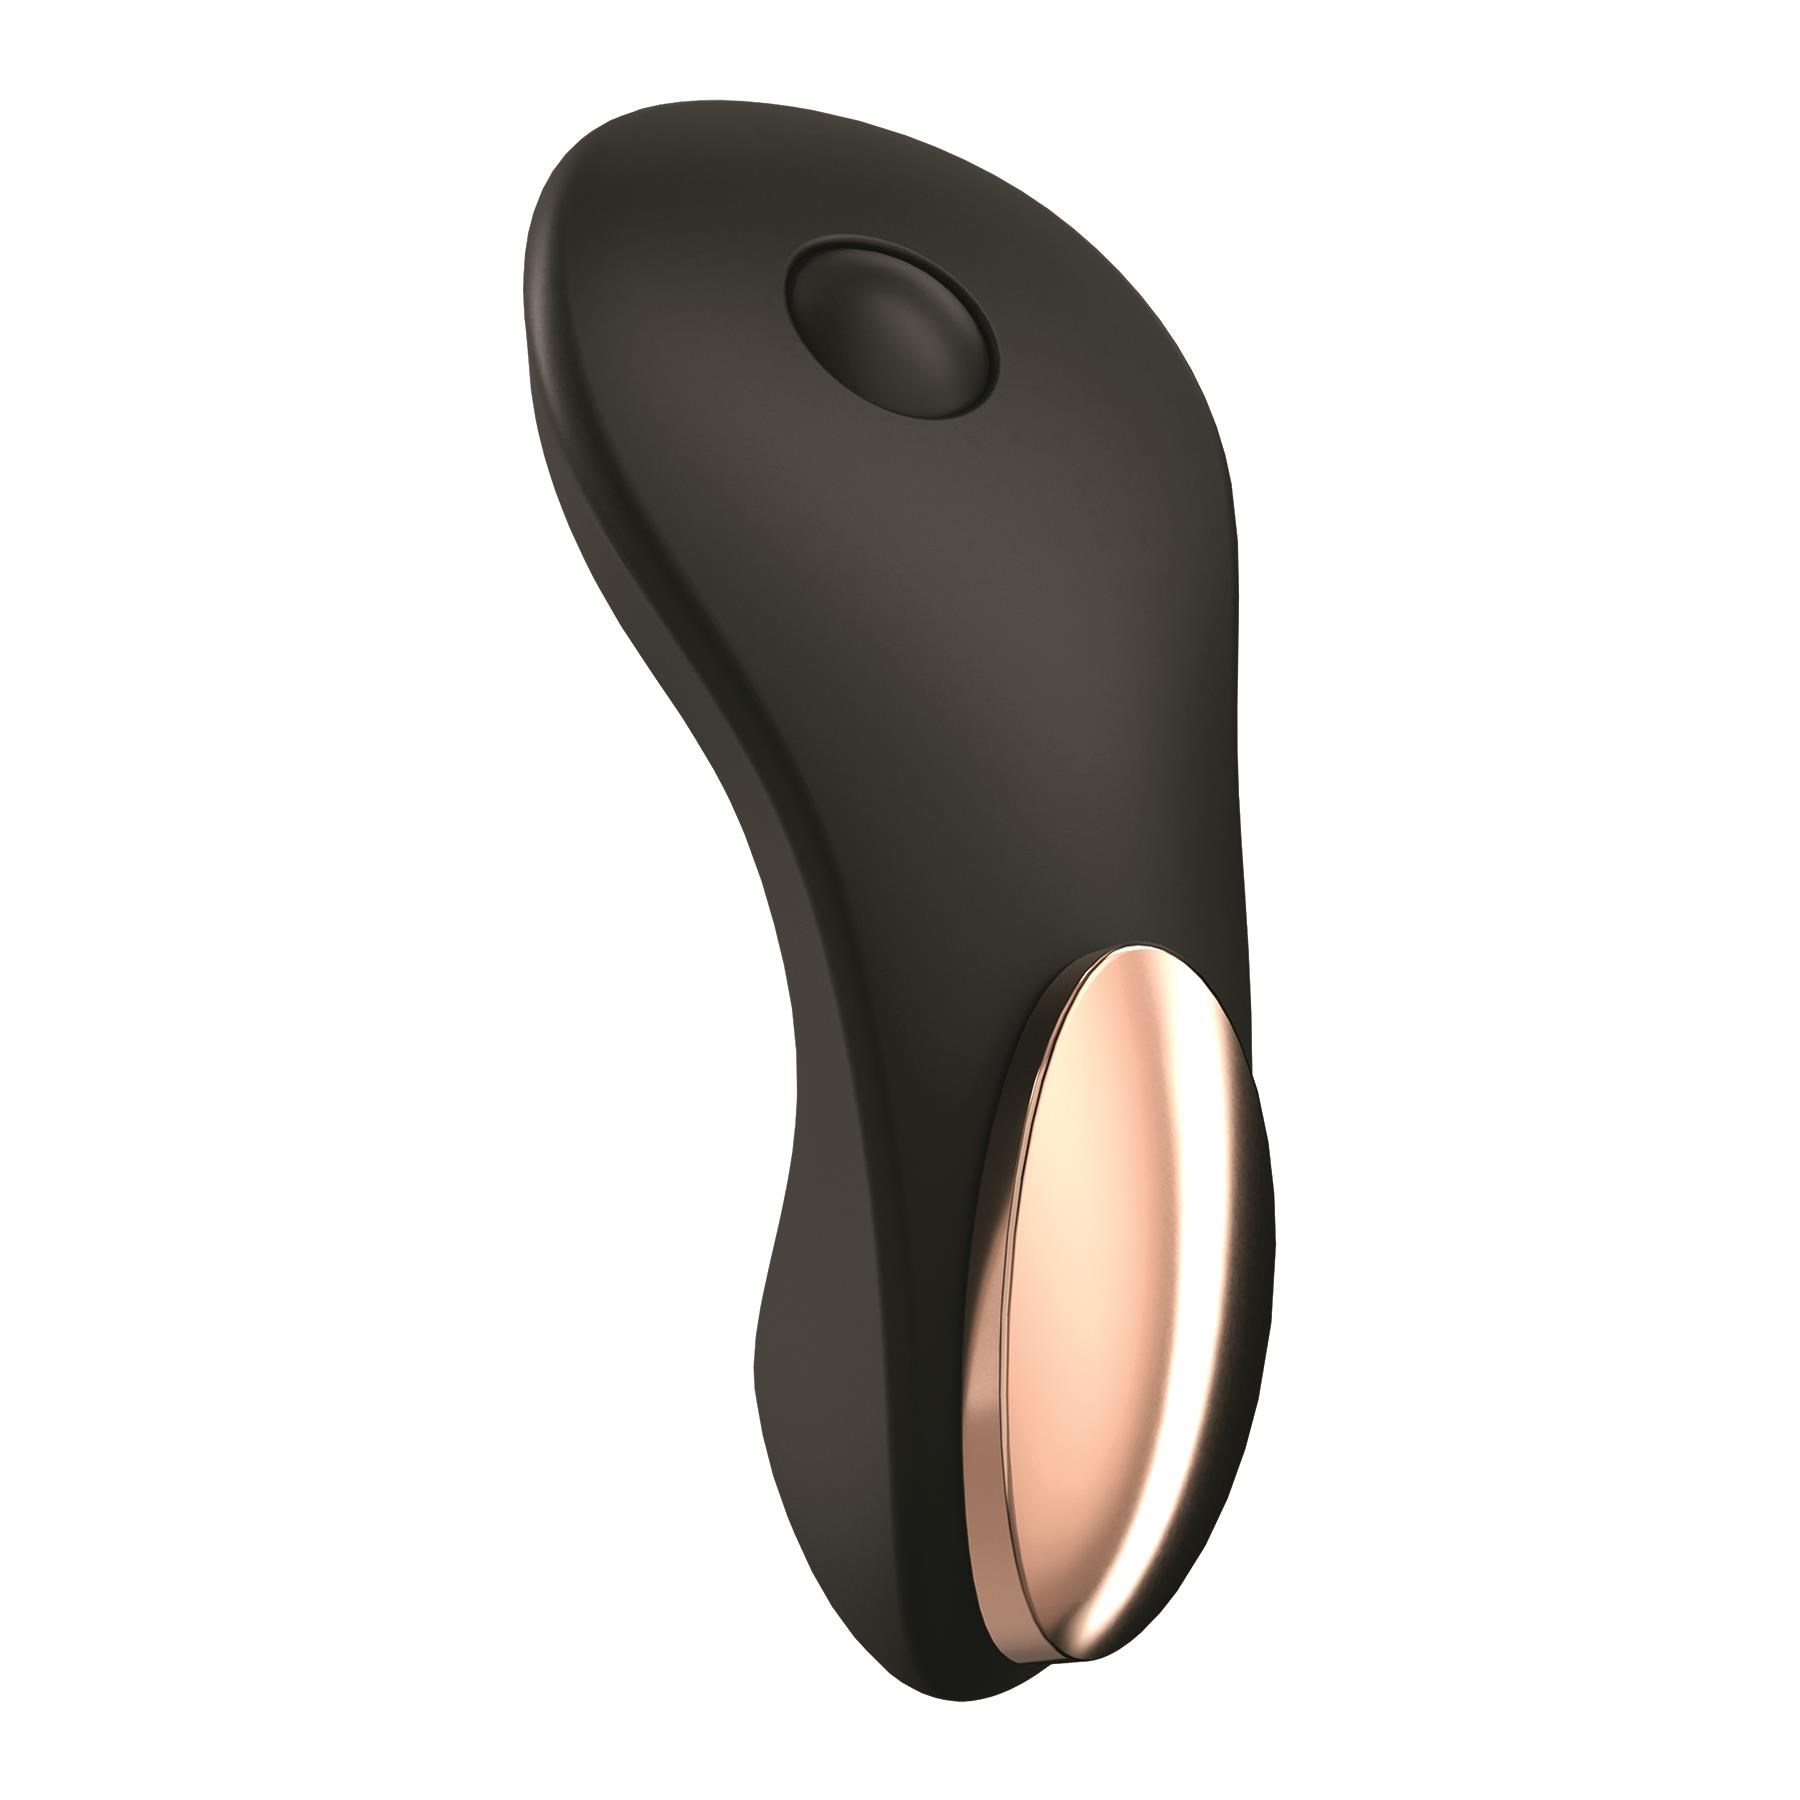 Satisfyer Little Secret Panty Vibrator Product Showing Magnet On Vibrator - At An Angle